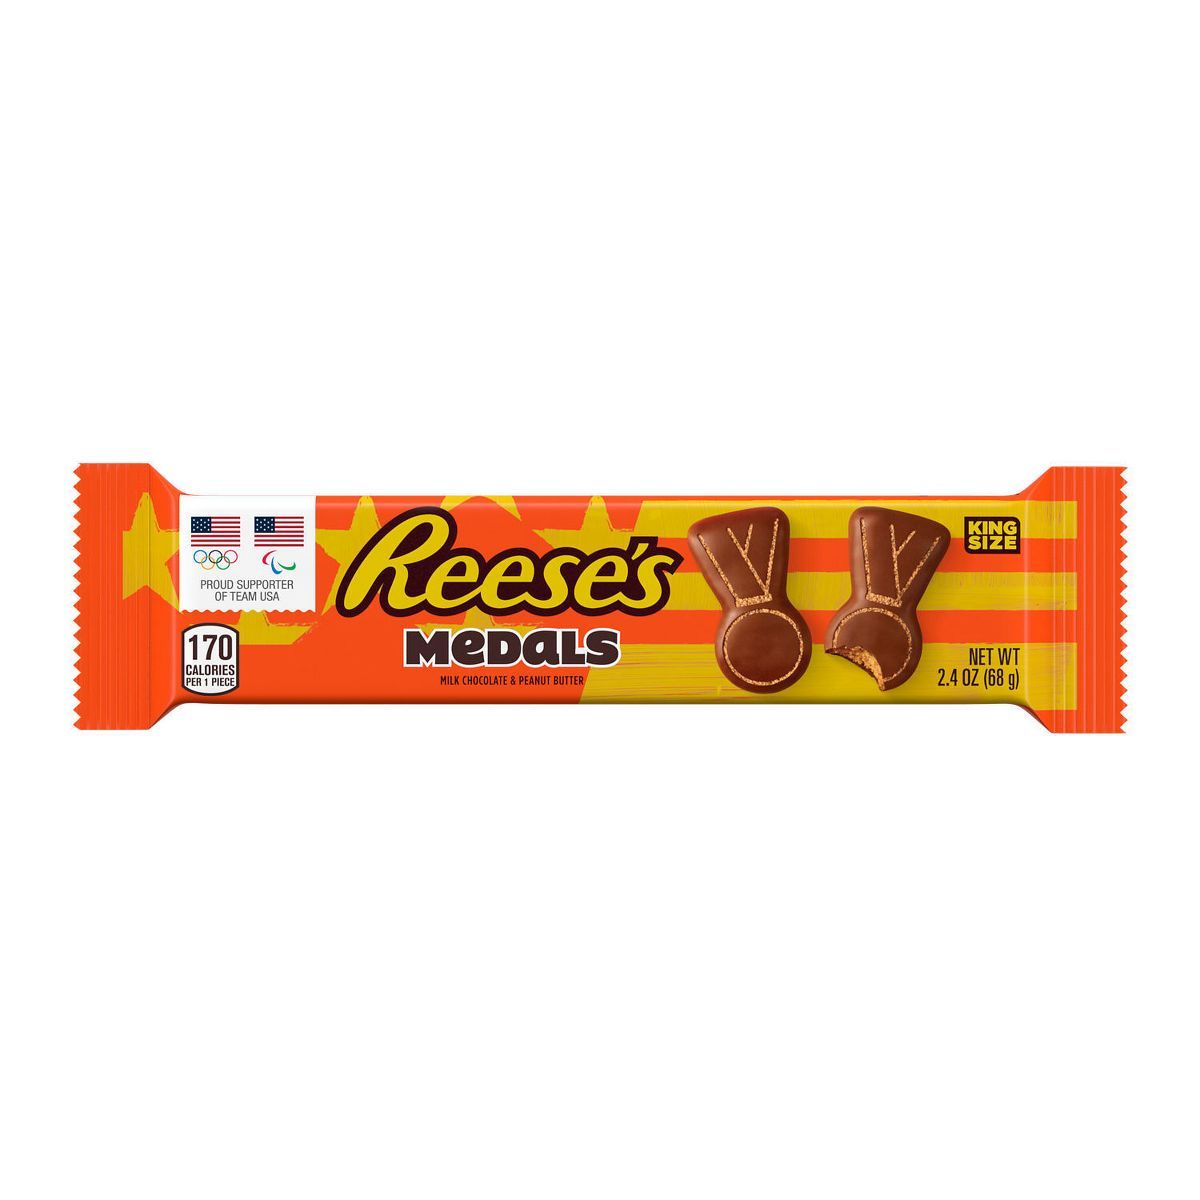 Reese's Milk Chocolate & Peanut Butter Medals Bar King Size - 2.4oz | Target